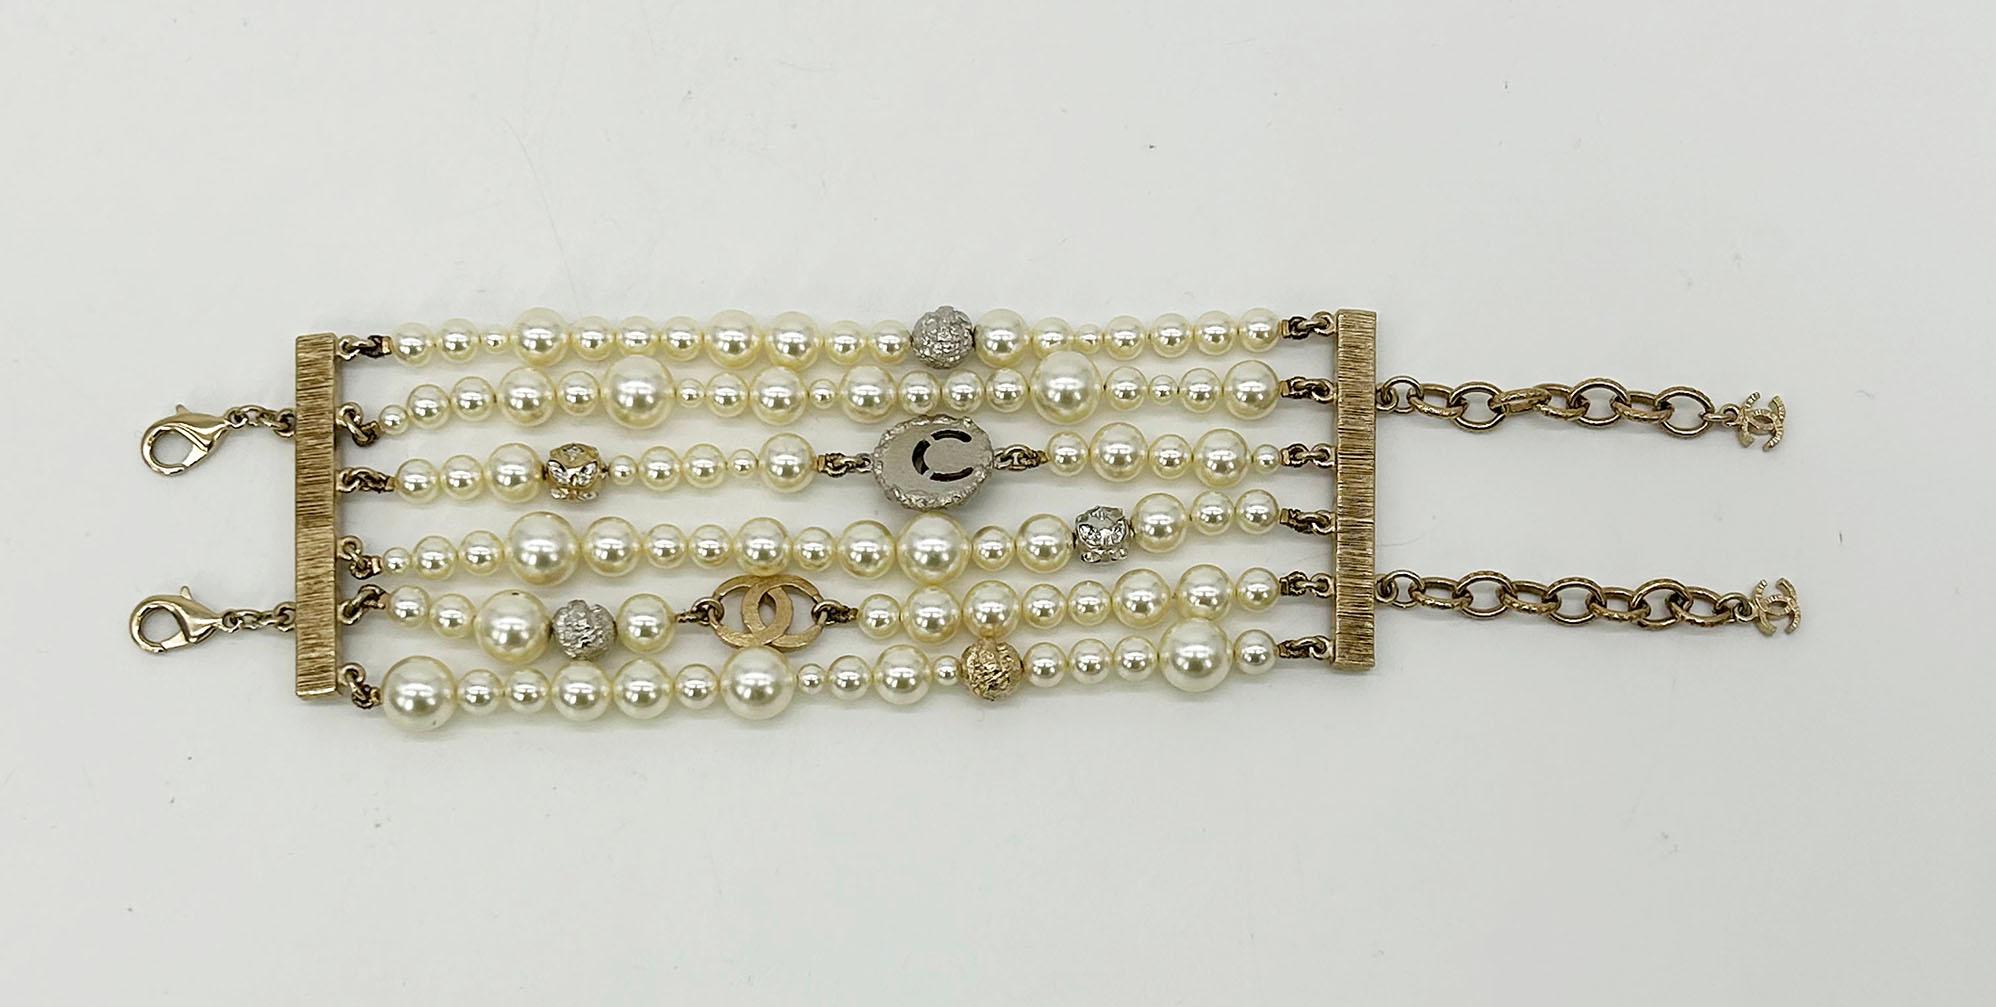 Chanel Pearl Multi Strand Charm Bracelet in excellent condition. Fabulous 6 strands of various size pearls with gold and silver metal beads, rhinestone metal beads, gold rhinestone CC logo charm, and gold/silver moon charm with resin planet inside.